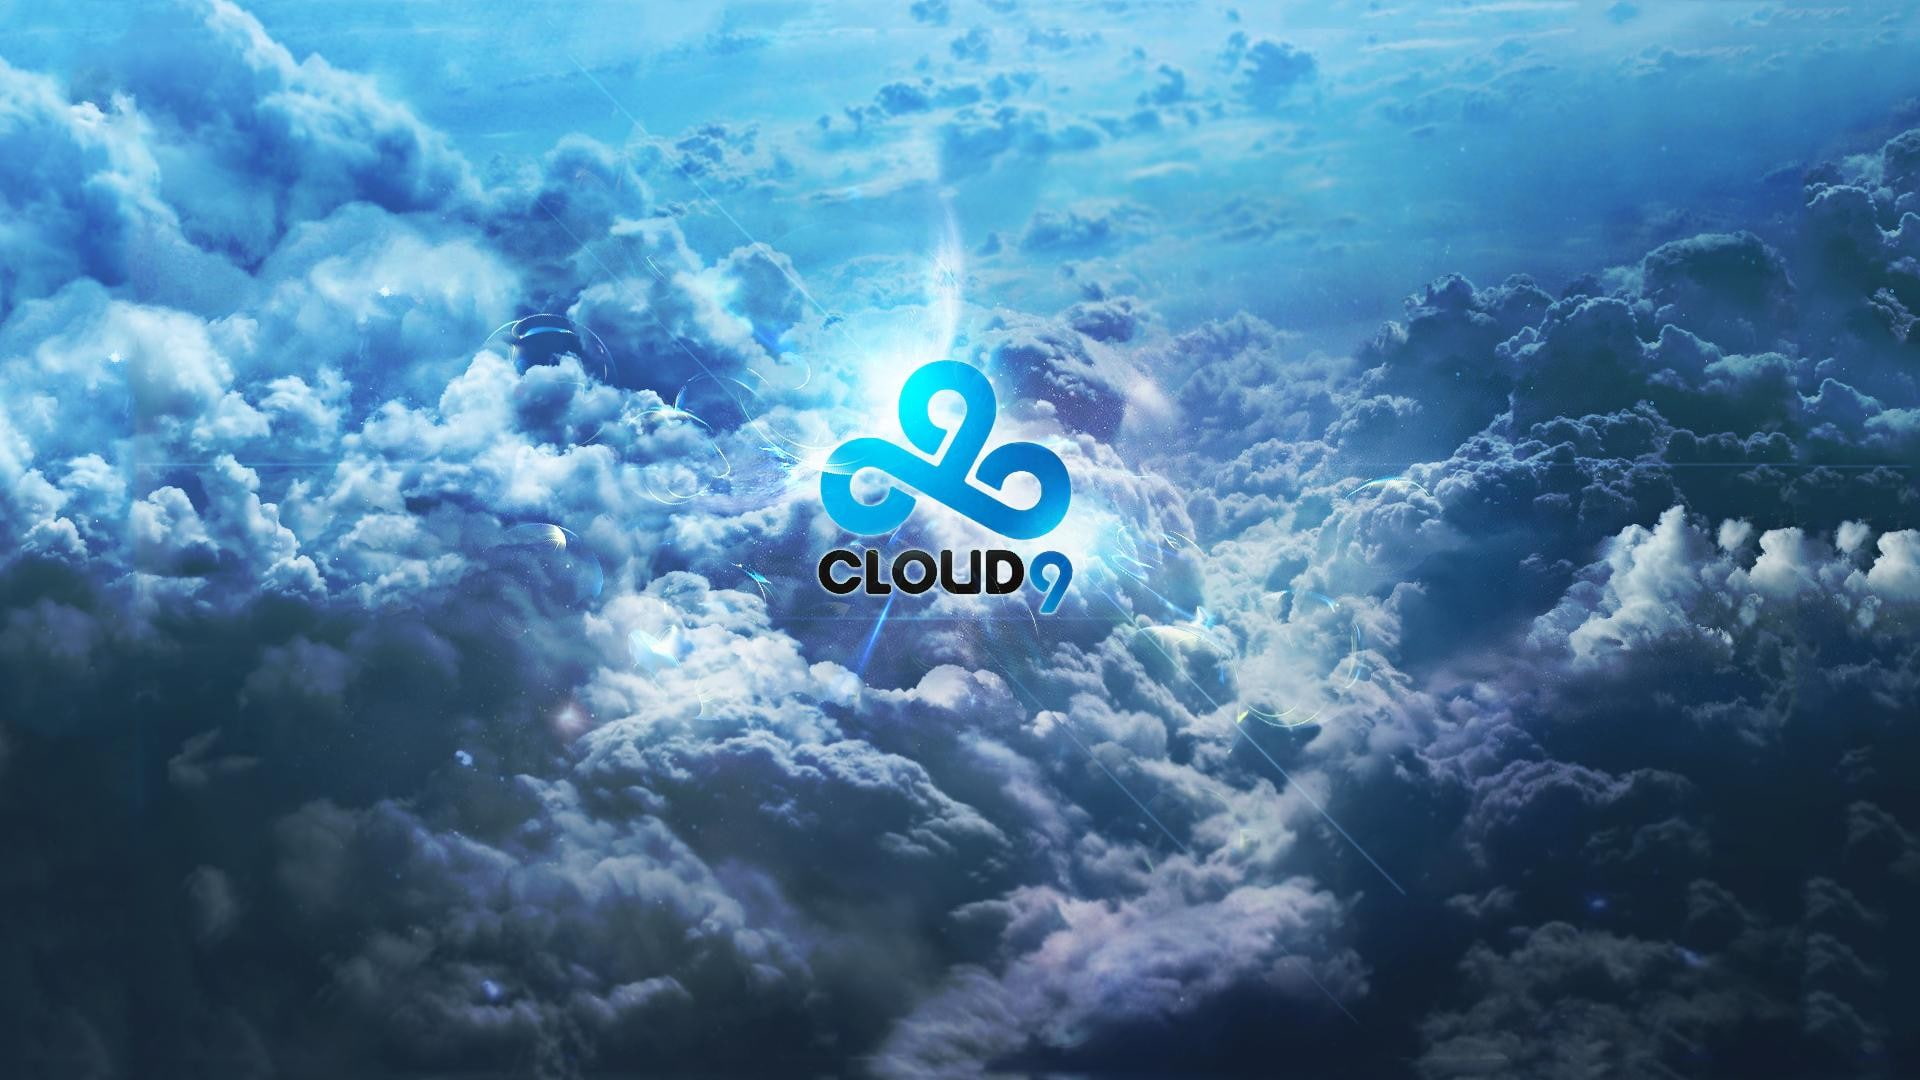 Cloud9, Counter Strike: Global Offensive, video games